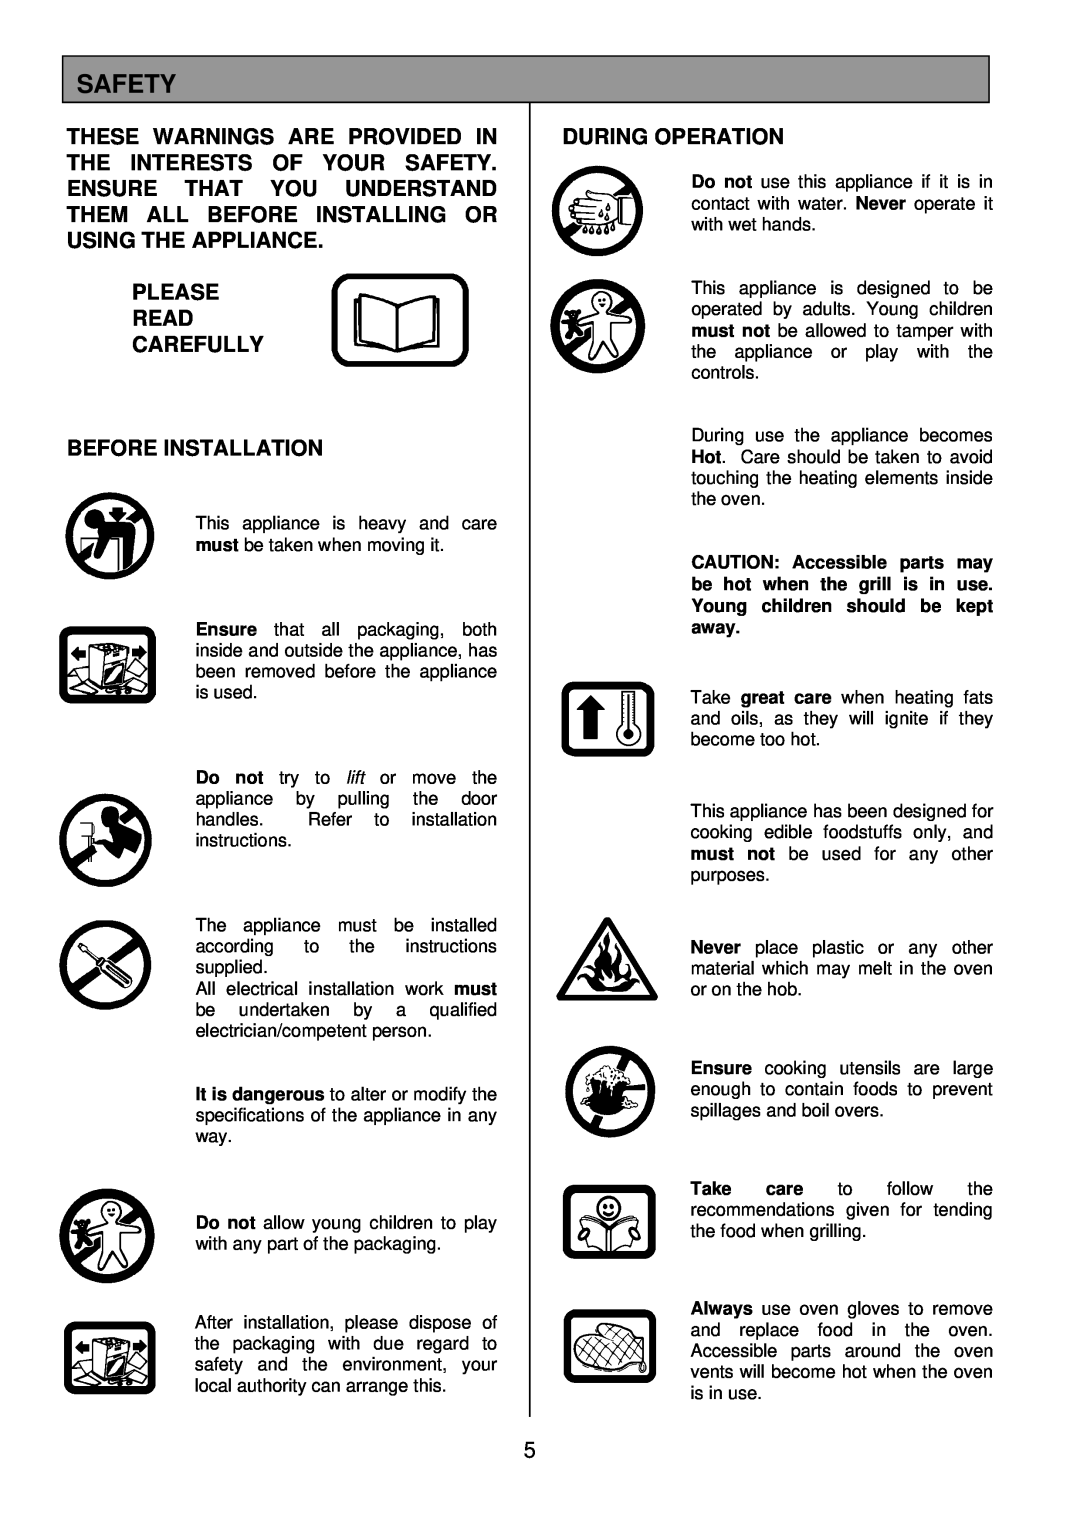 Zanussi ZDQ 895 manual Safety, Please Read Carefully Before Installation, During Operation 